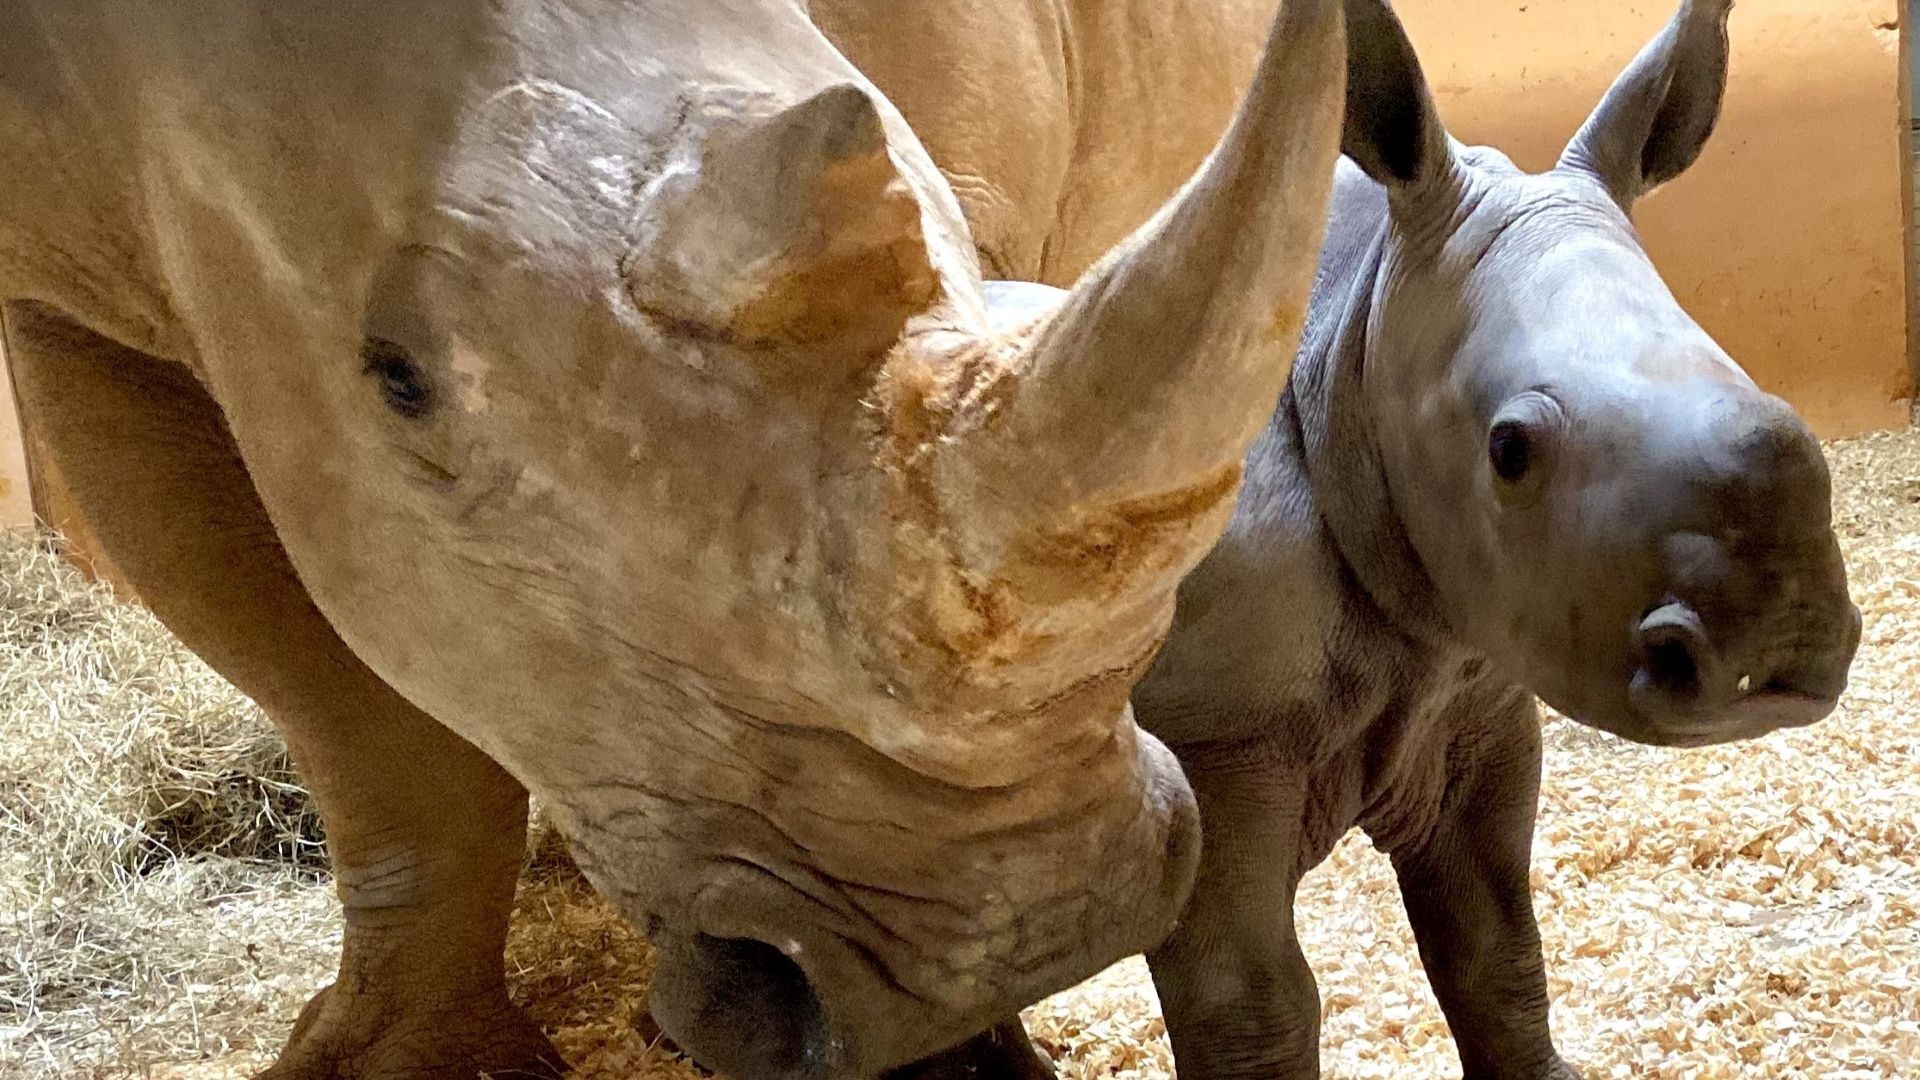 Animal conservationists are optimistic after an attempt to impregnate a Northern White Rhino female with a transferred embryo.